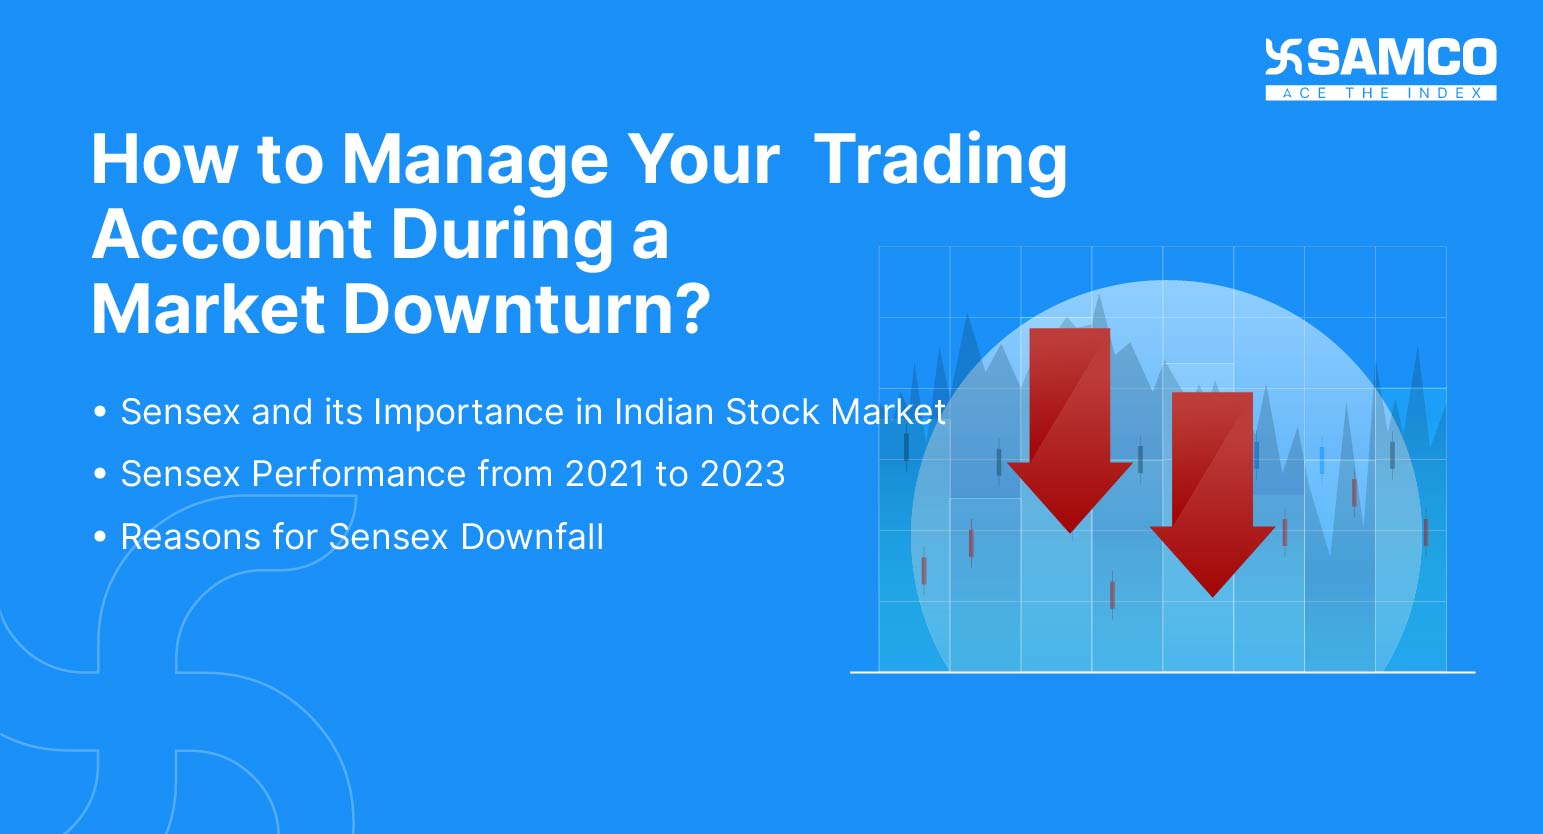 How to Manage Your Trading Account During a Market Downturn?